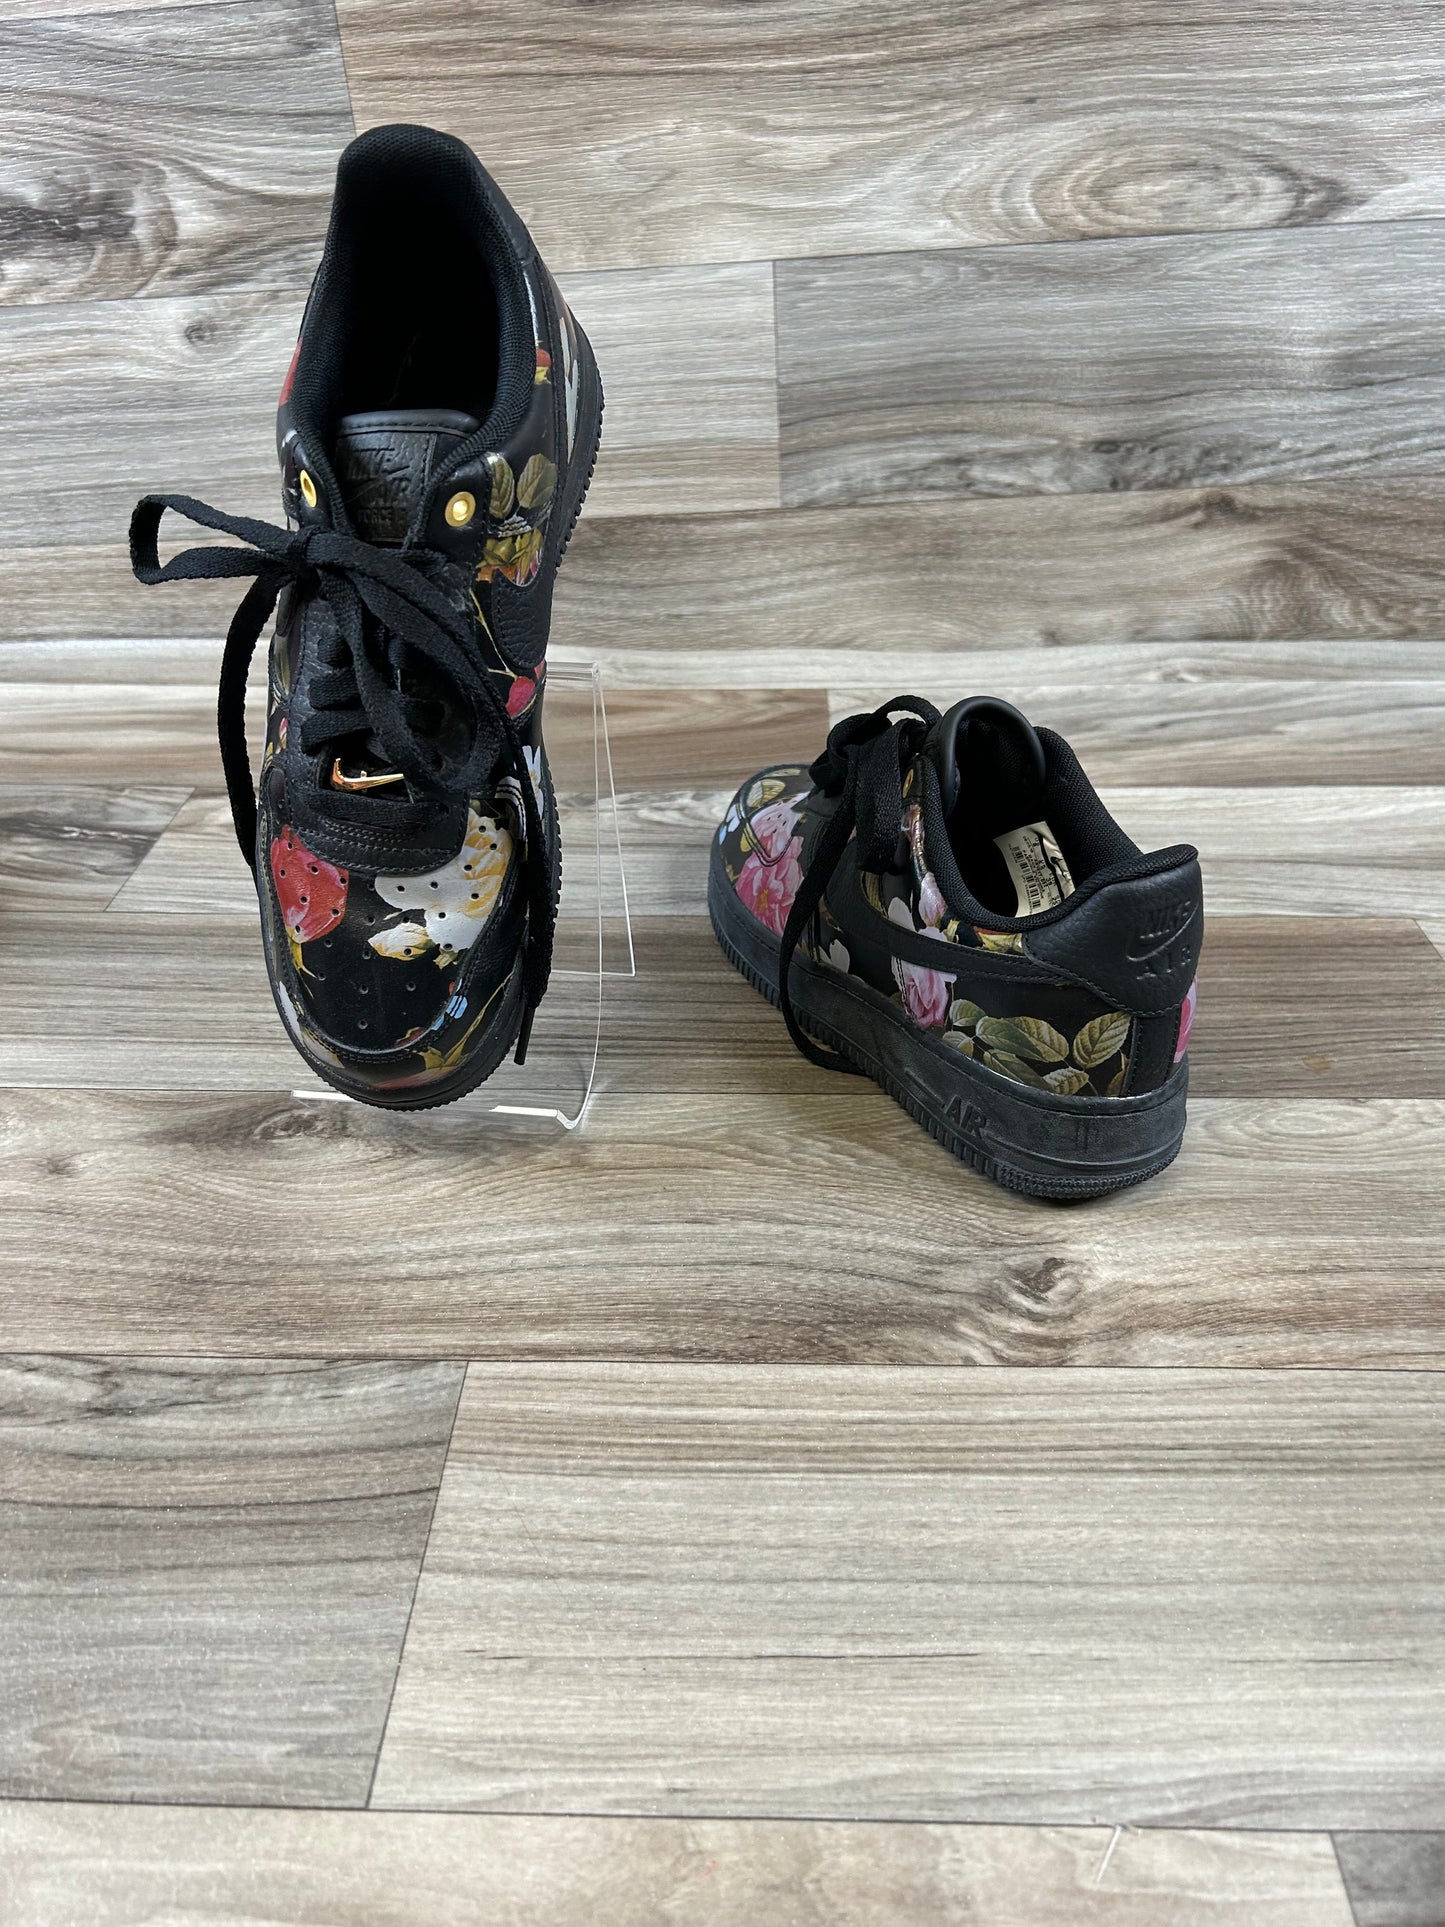 Floral Print Shoes Athletic Nike, Size 8